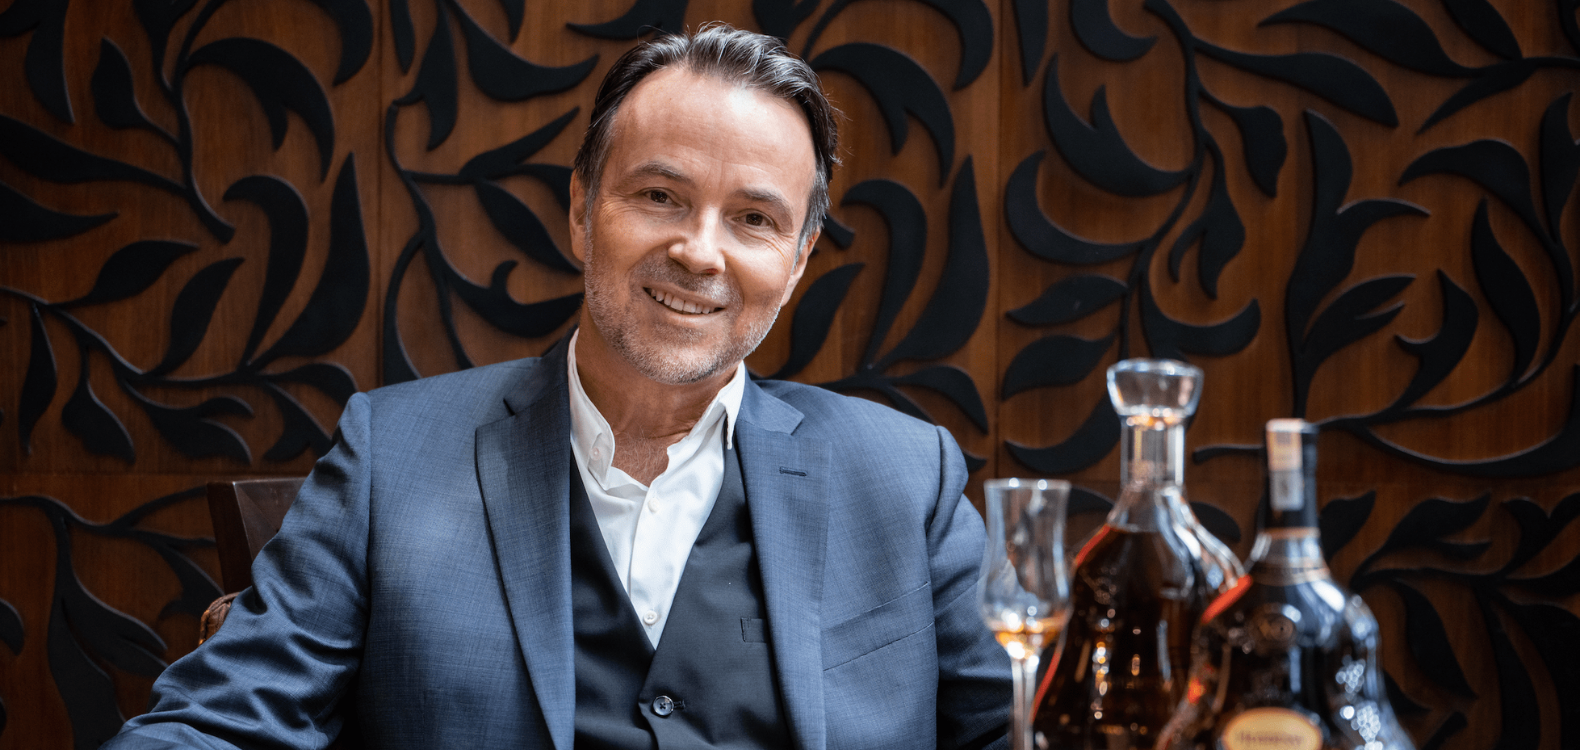 Getting To Know Thomas Bouleuc, Managing Director Of Moët Hennessy